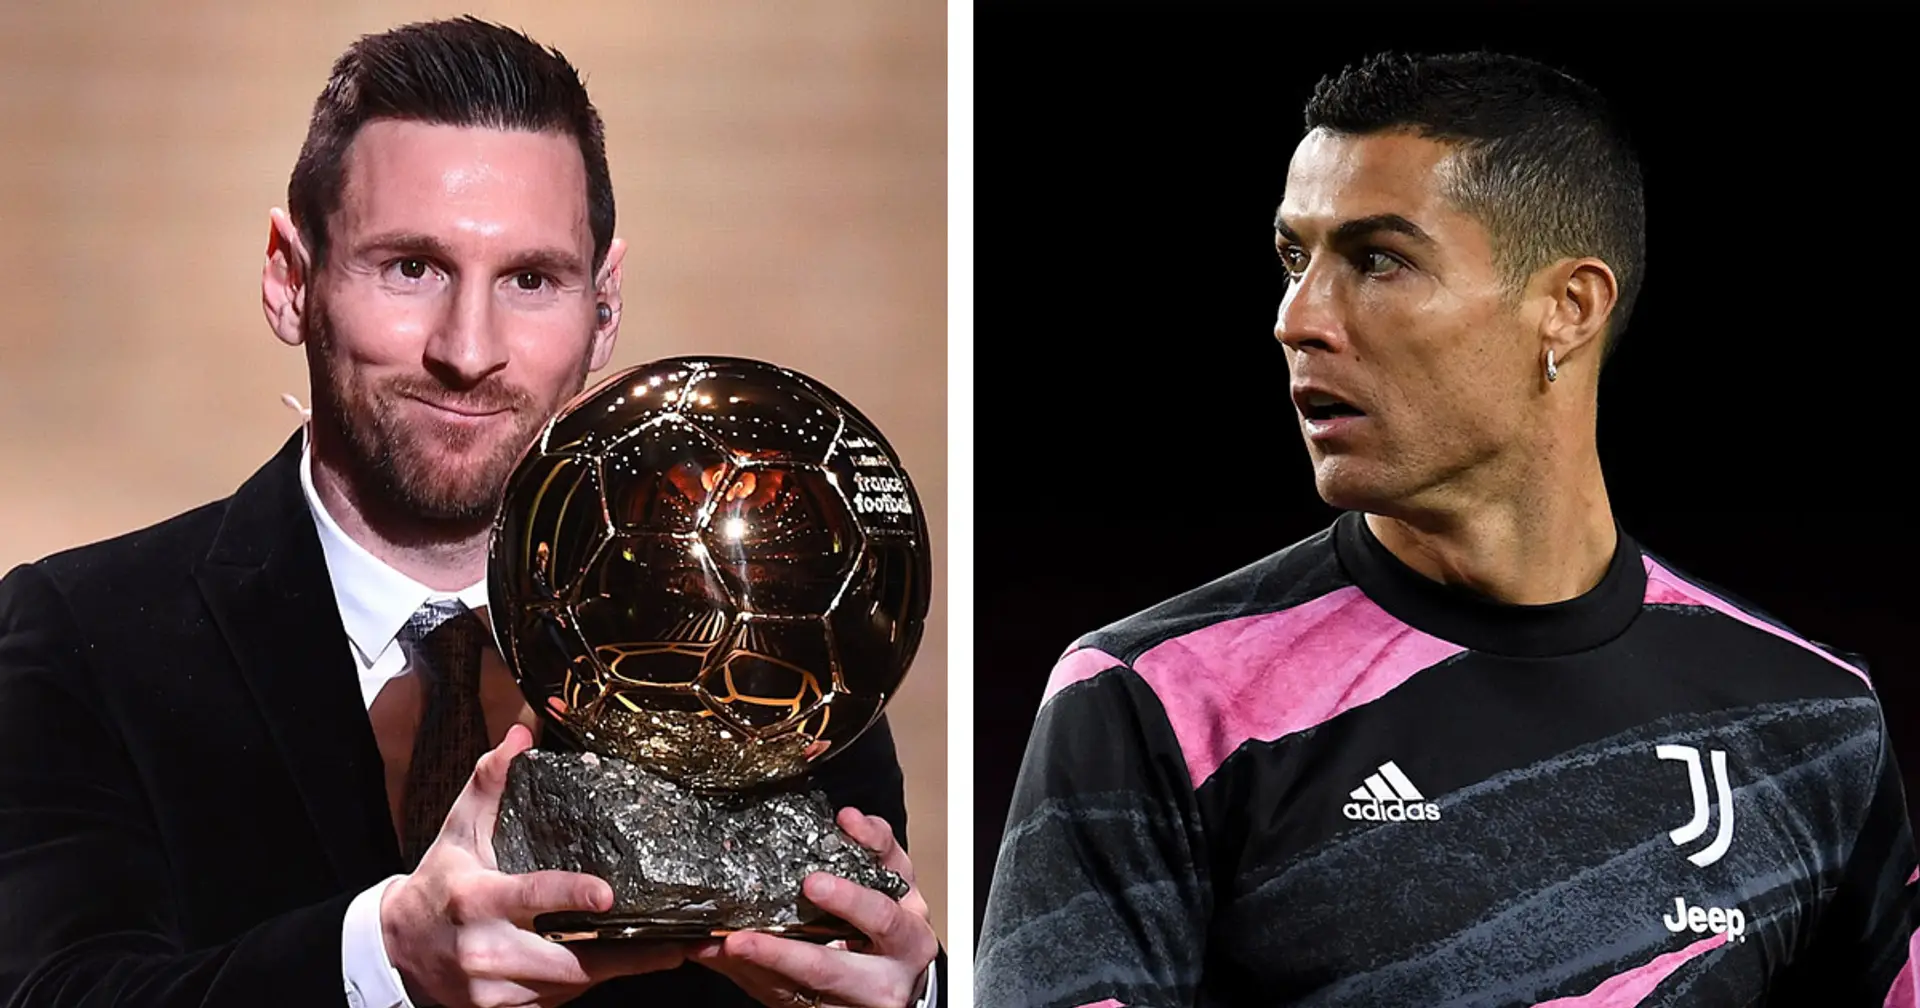 Leo Messi snubs Ronaldo in 2020 Best FIFA voting but still backed Cristiano for individual awards more times than his biggest rival since 2010